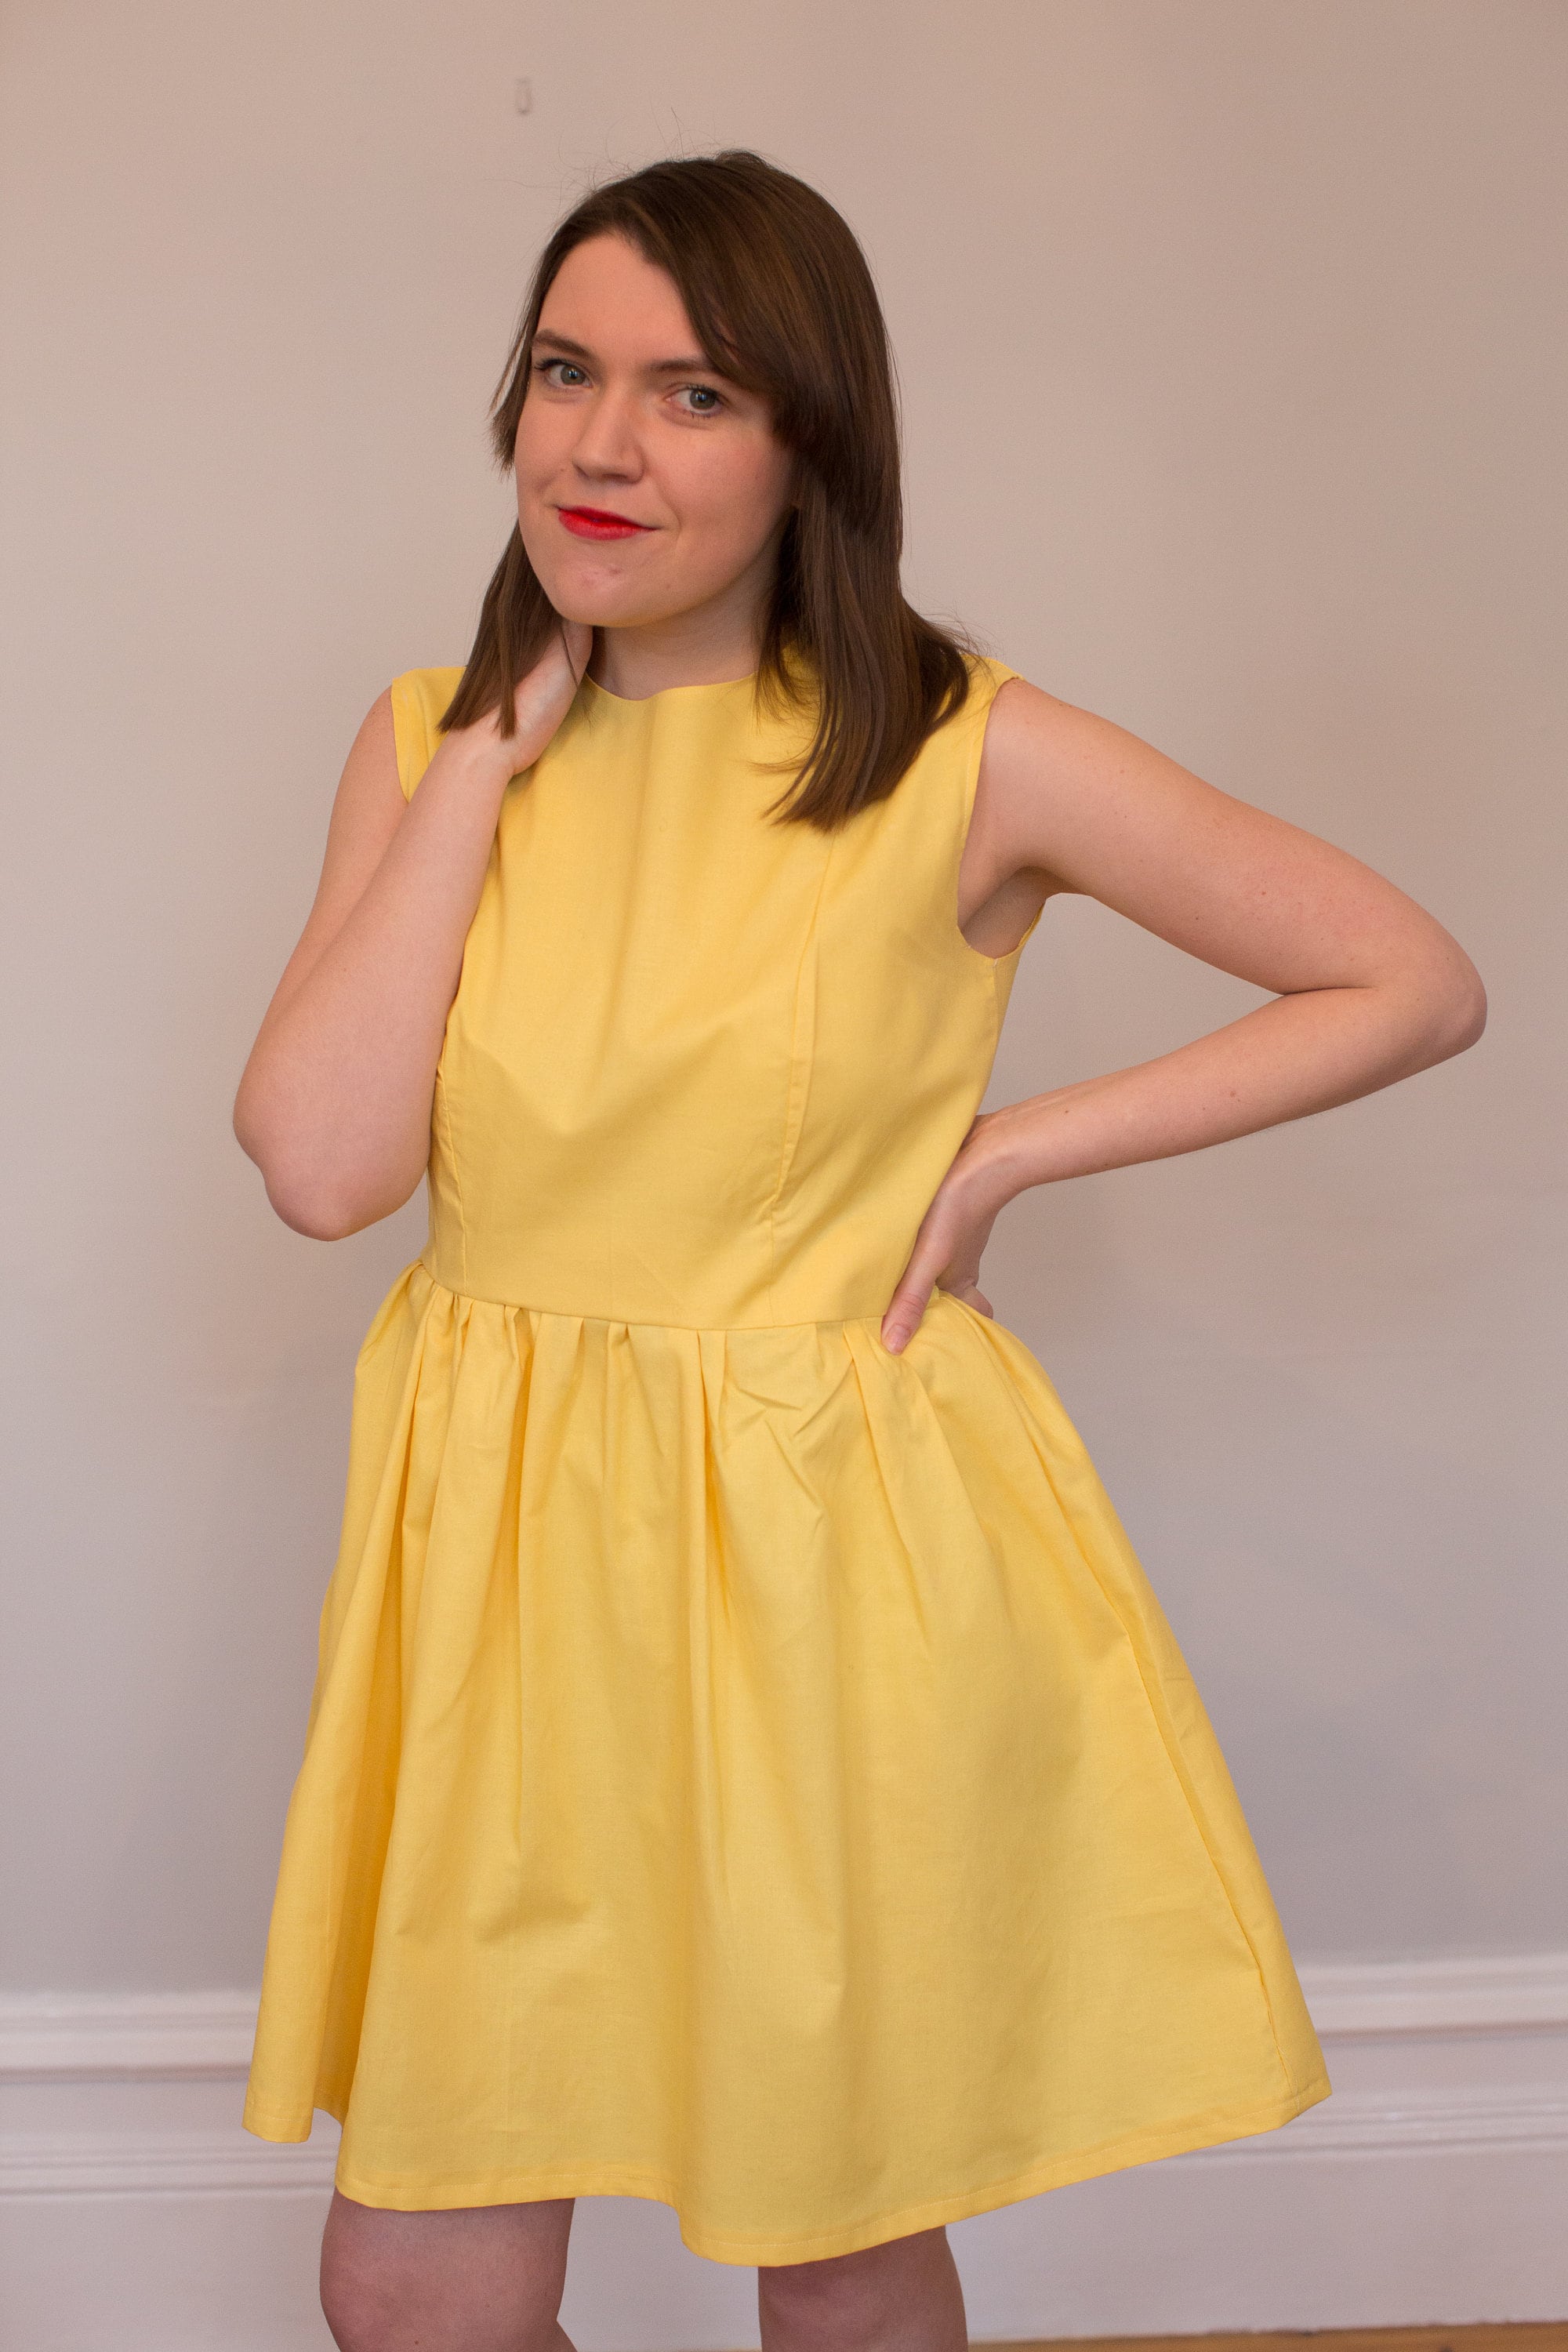 Yellow pleated dress in lightweight fabric | Etsy